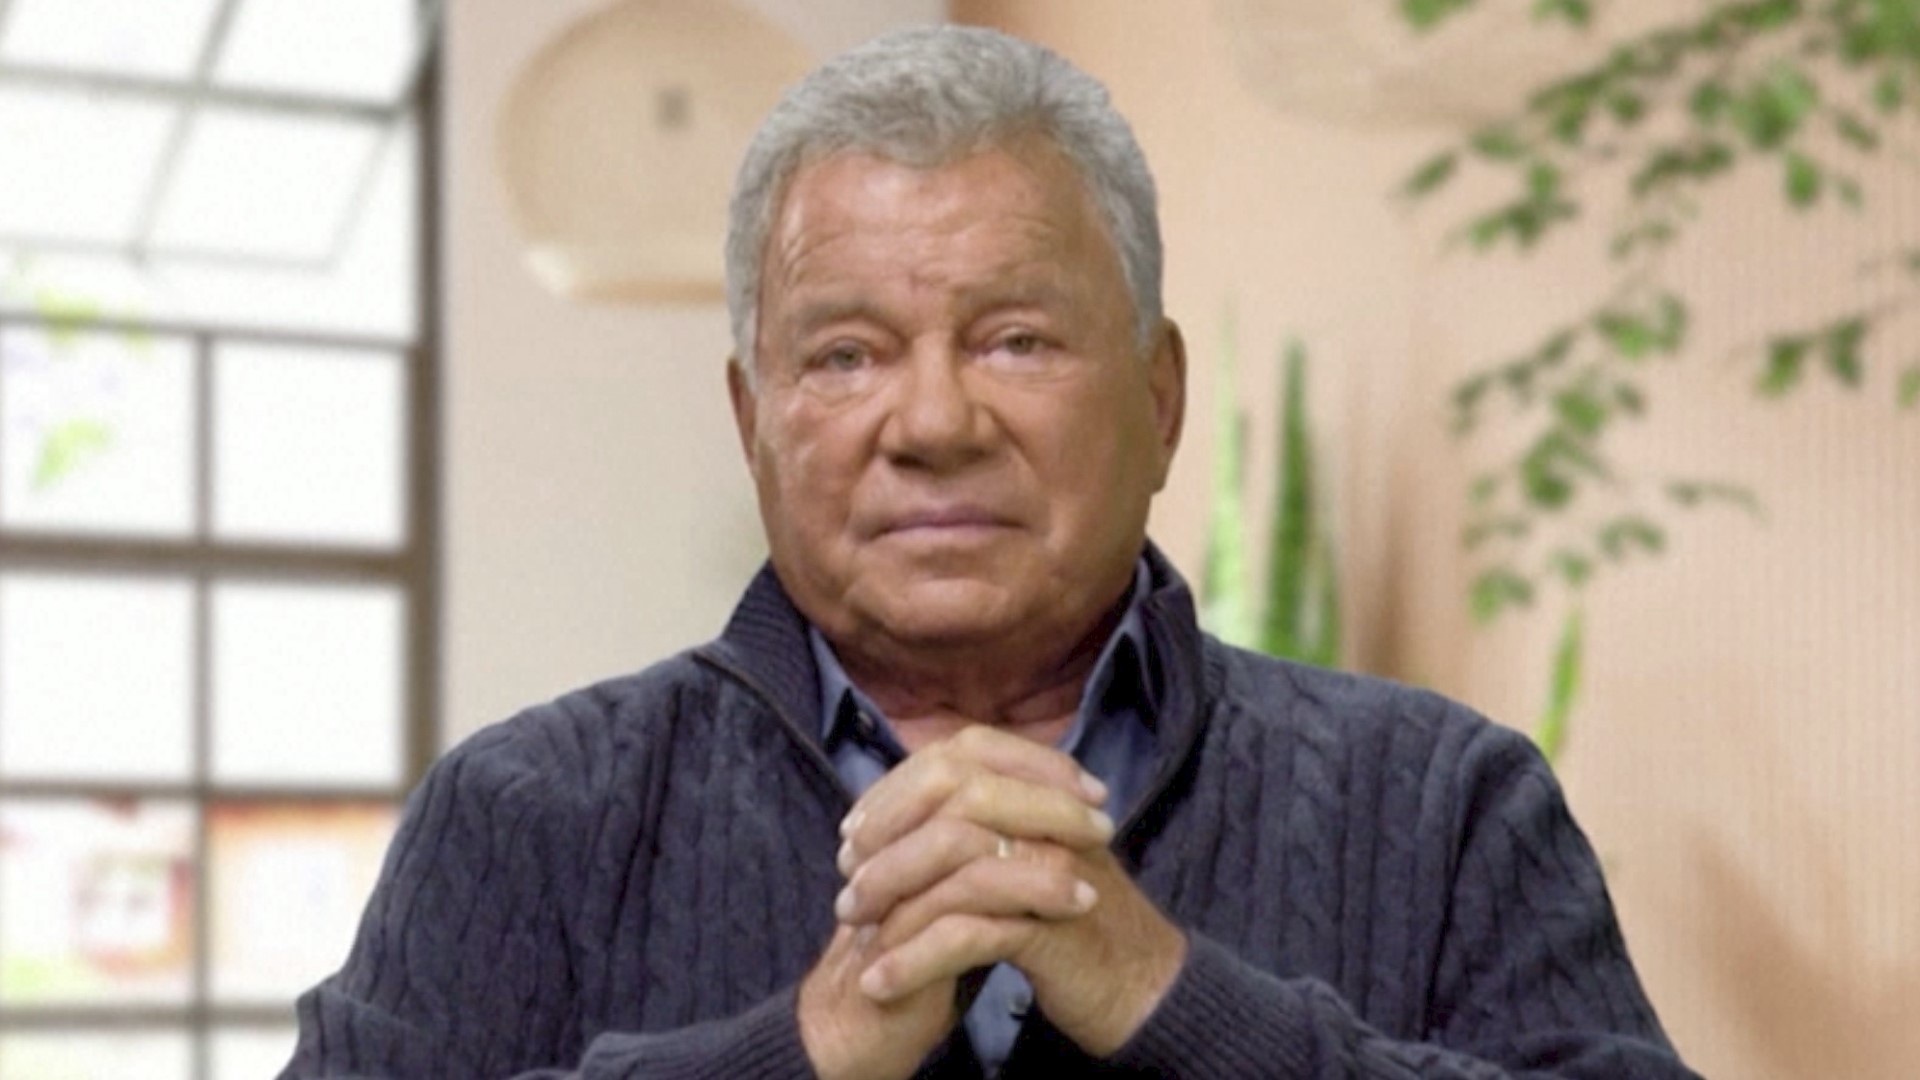 Starting in May, you will be able to ask an AI version of Shatner any question you want.